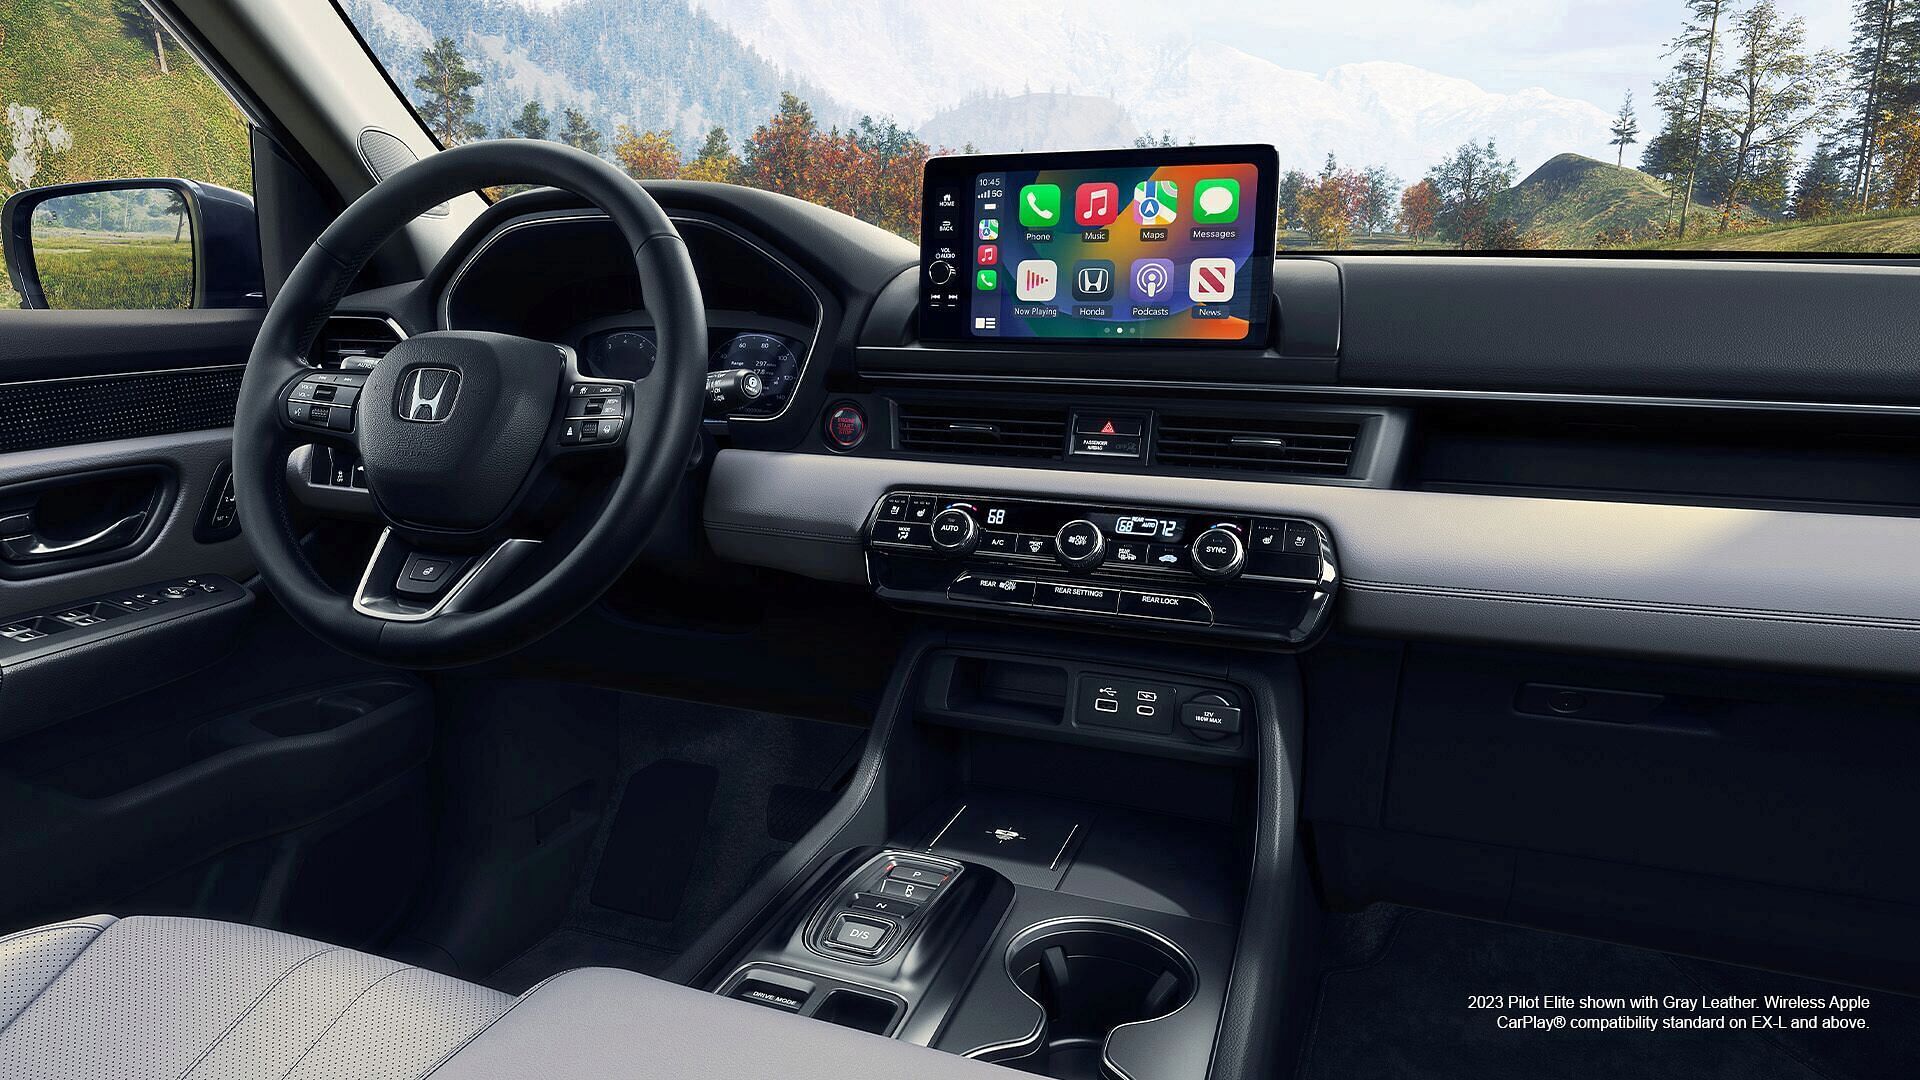 Interior of 2023 Honda Pilot Elite shown with Gray Leather. Wireless Apple CarPlay compatibility standard on EX-L and above.